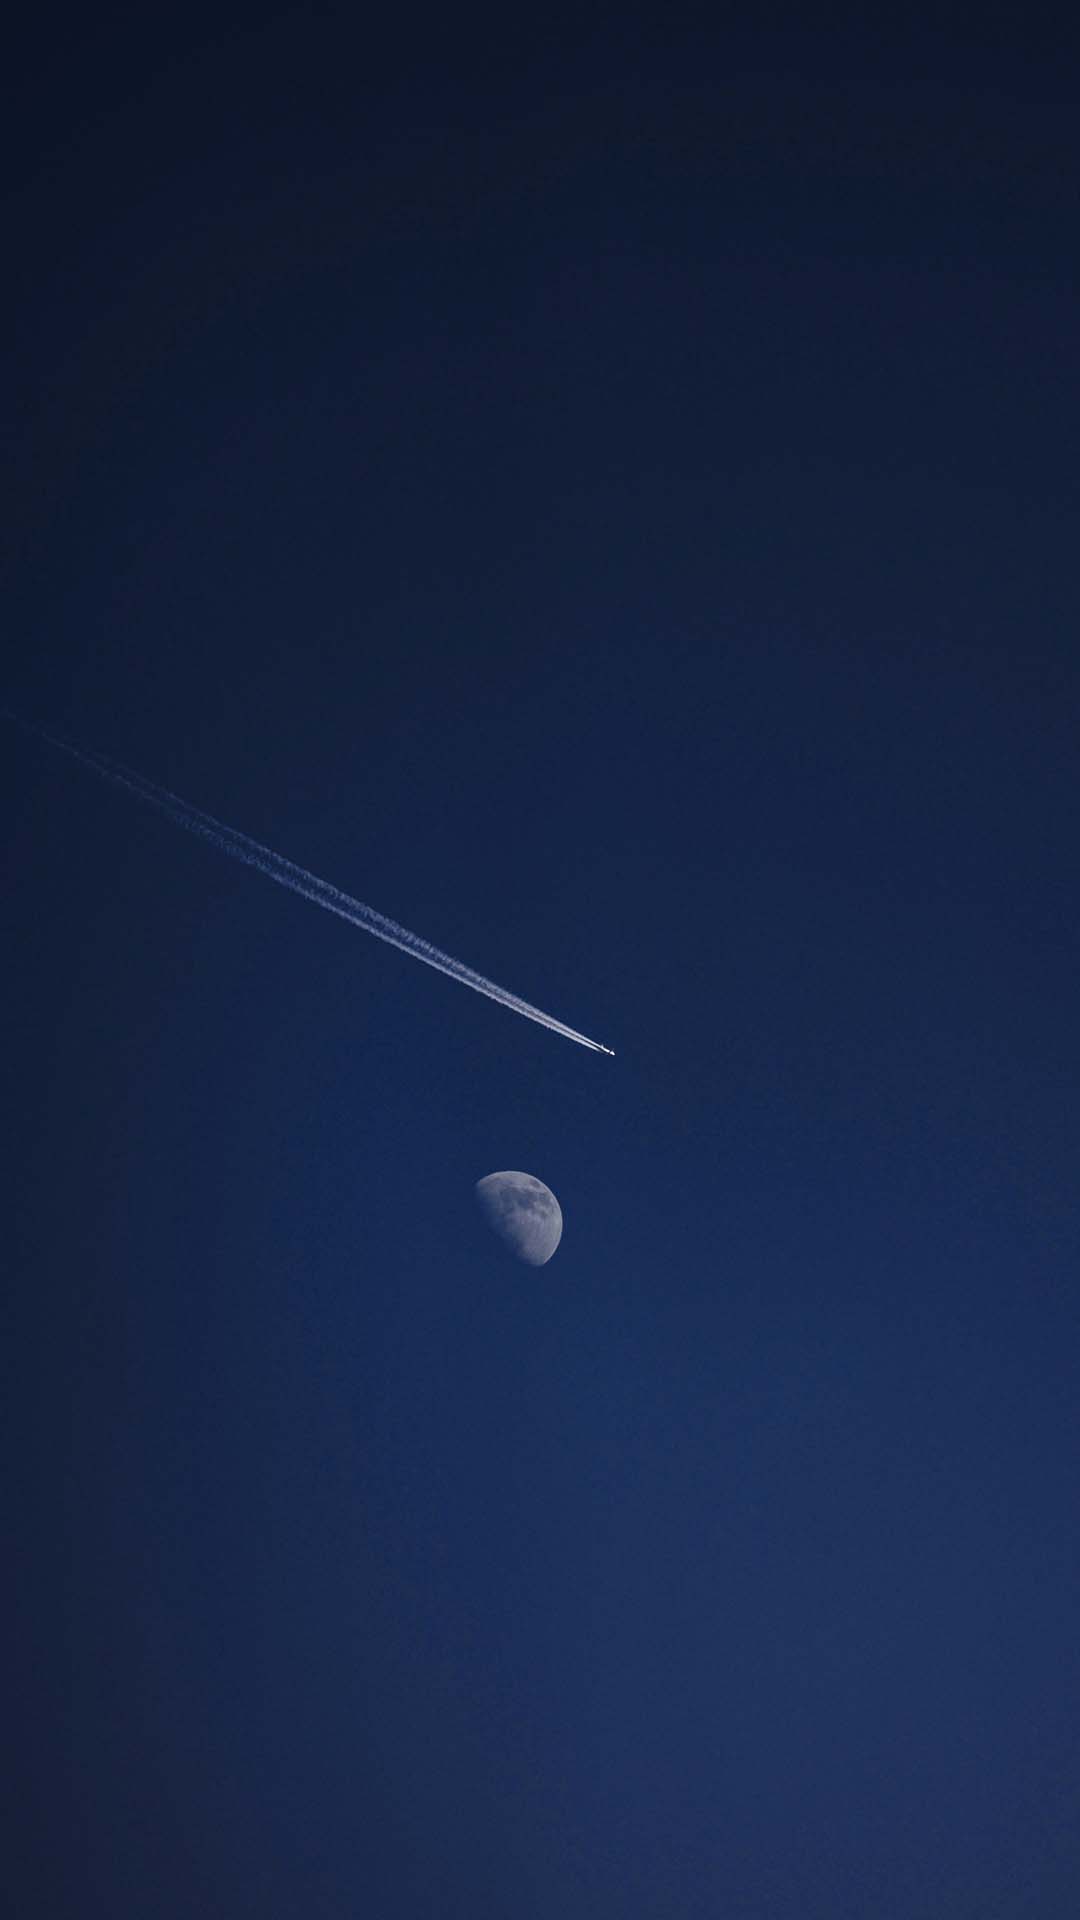 An aircraft cruising in front of the moon